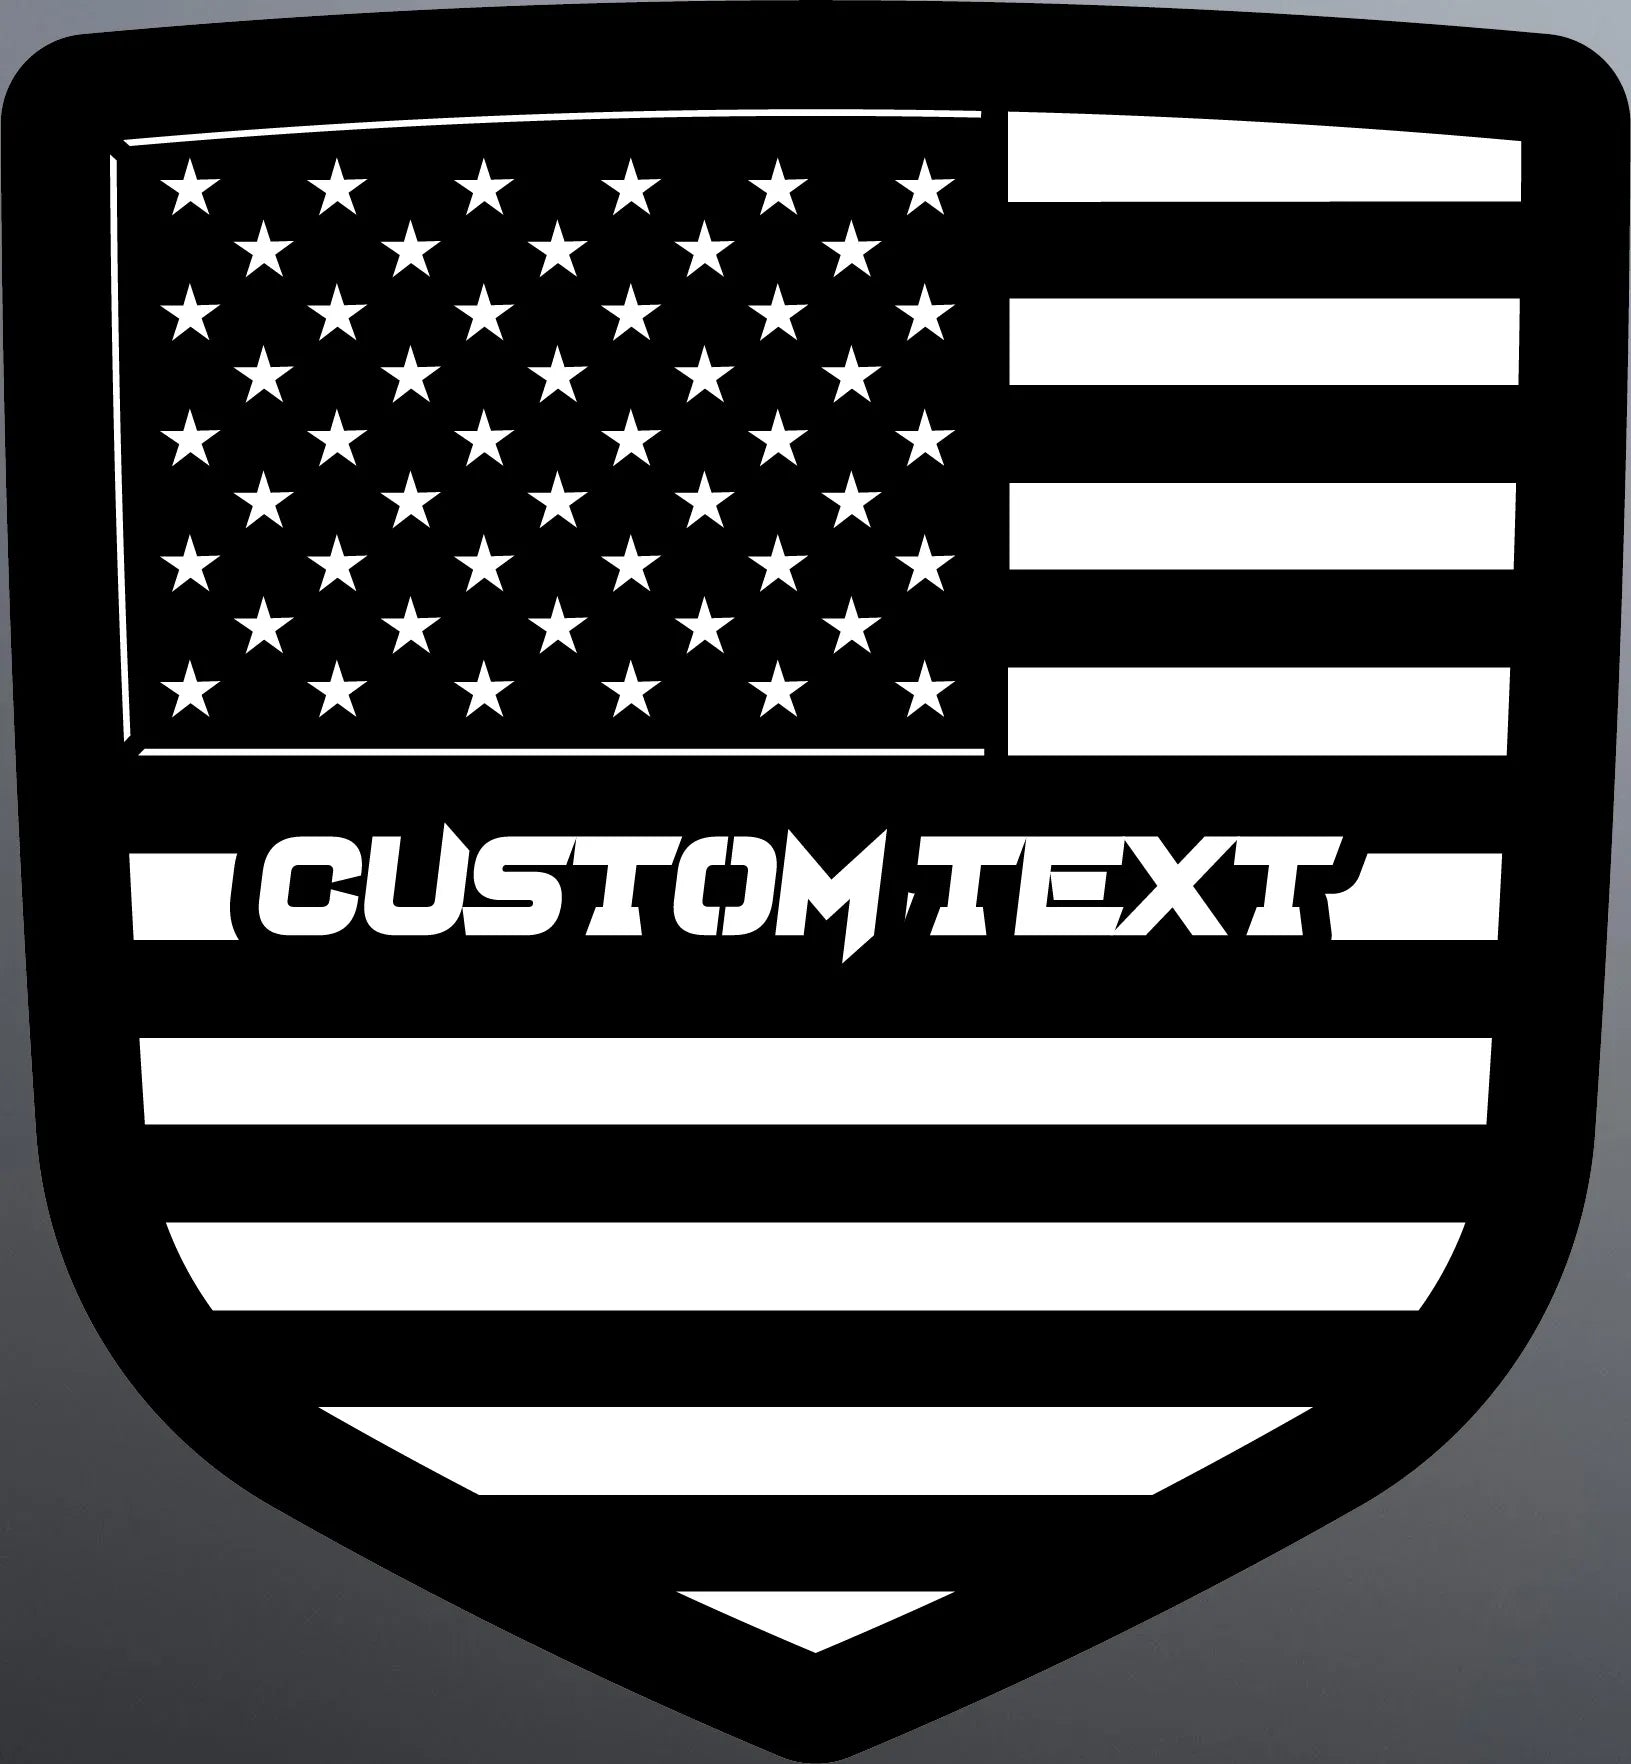 American Flag Custom Text Badge - Choose your Generation Dodge® RAM® -1500, 2500, 3500 - Multiple Colors Available